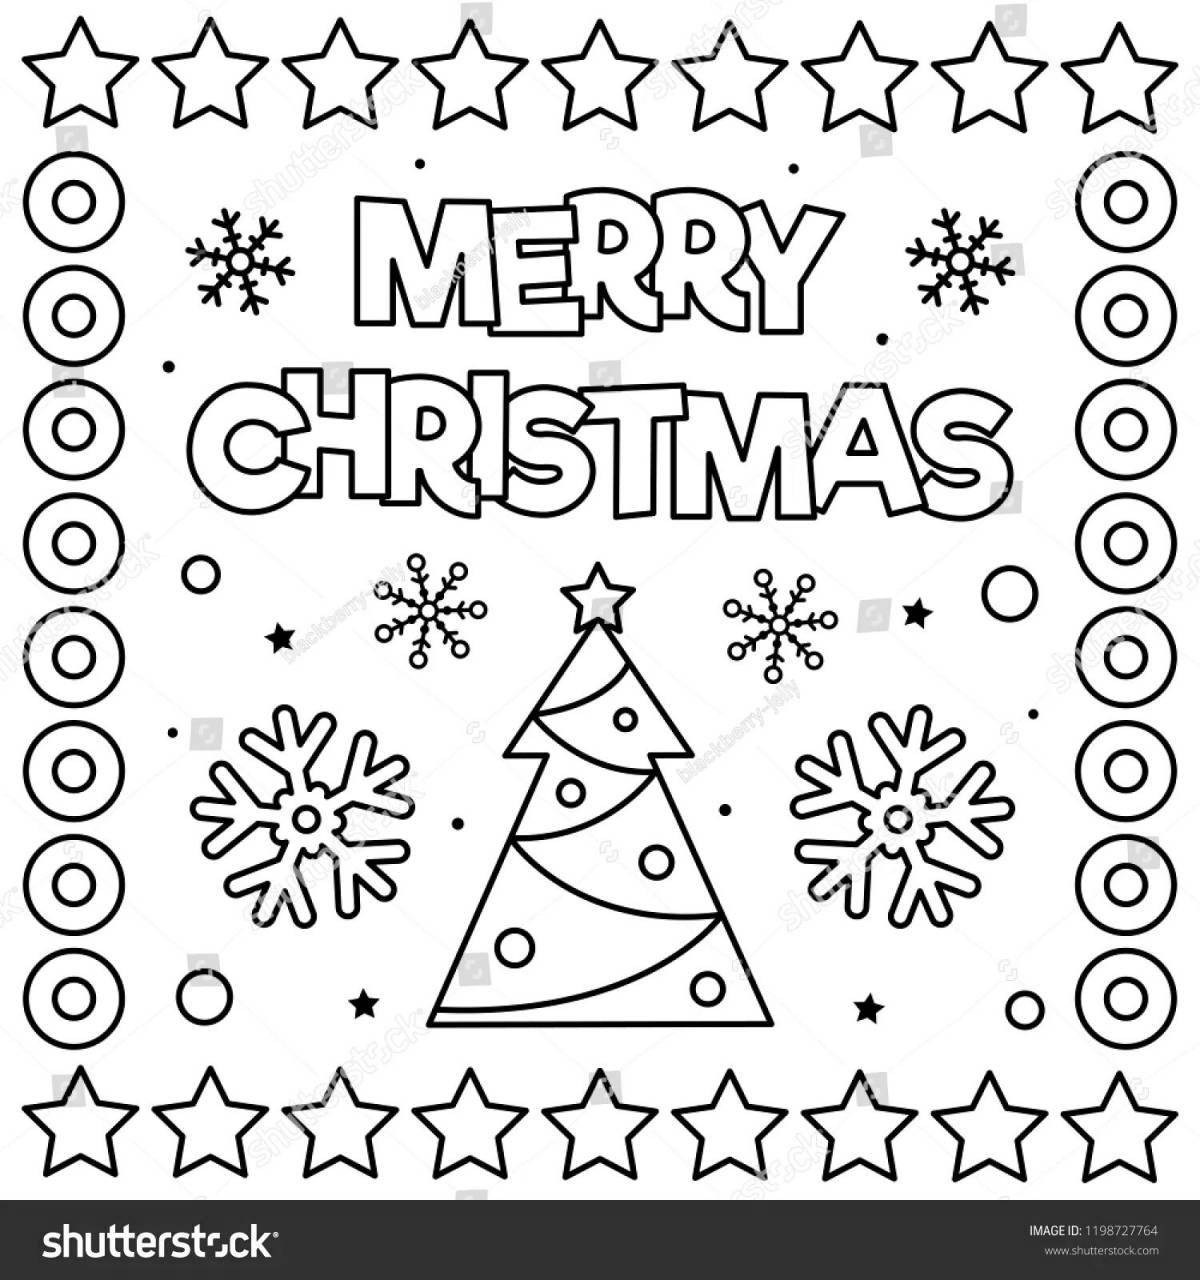 Mary's bright Christmas coloring book